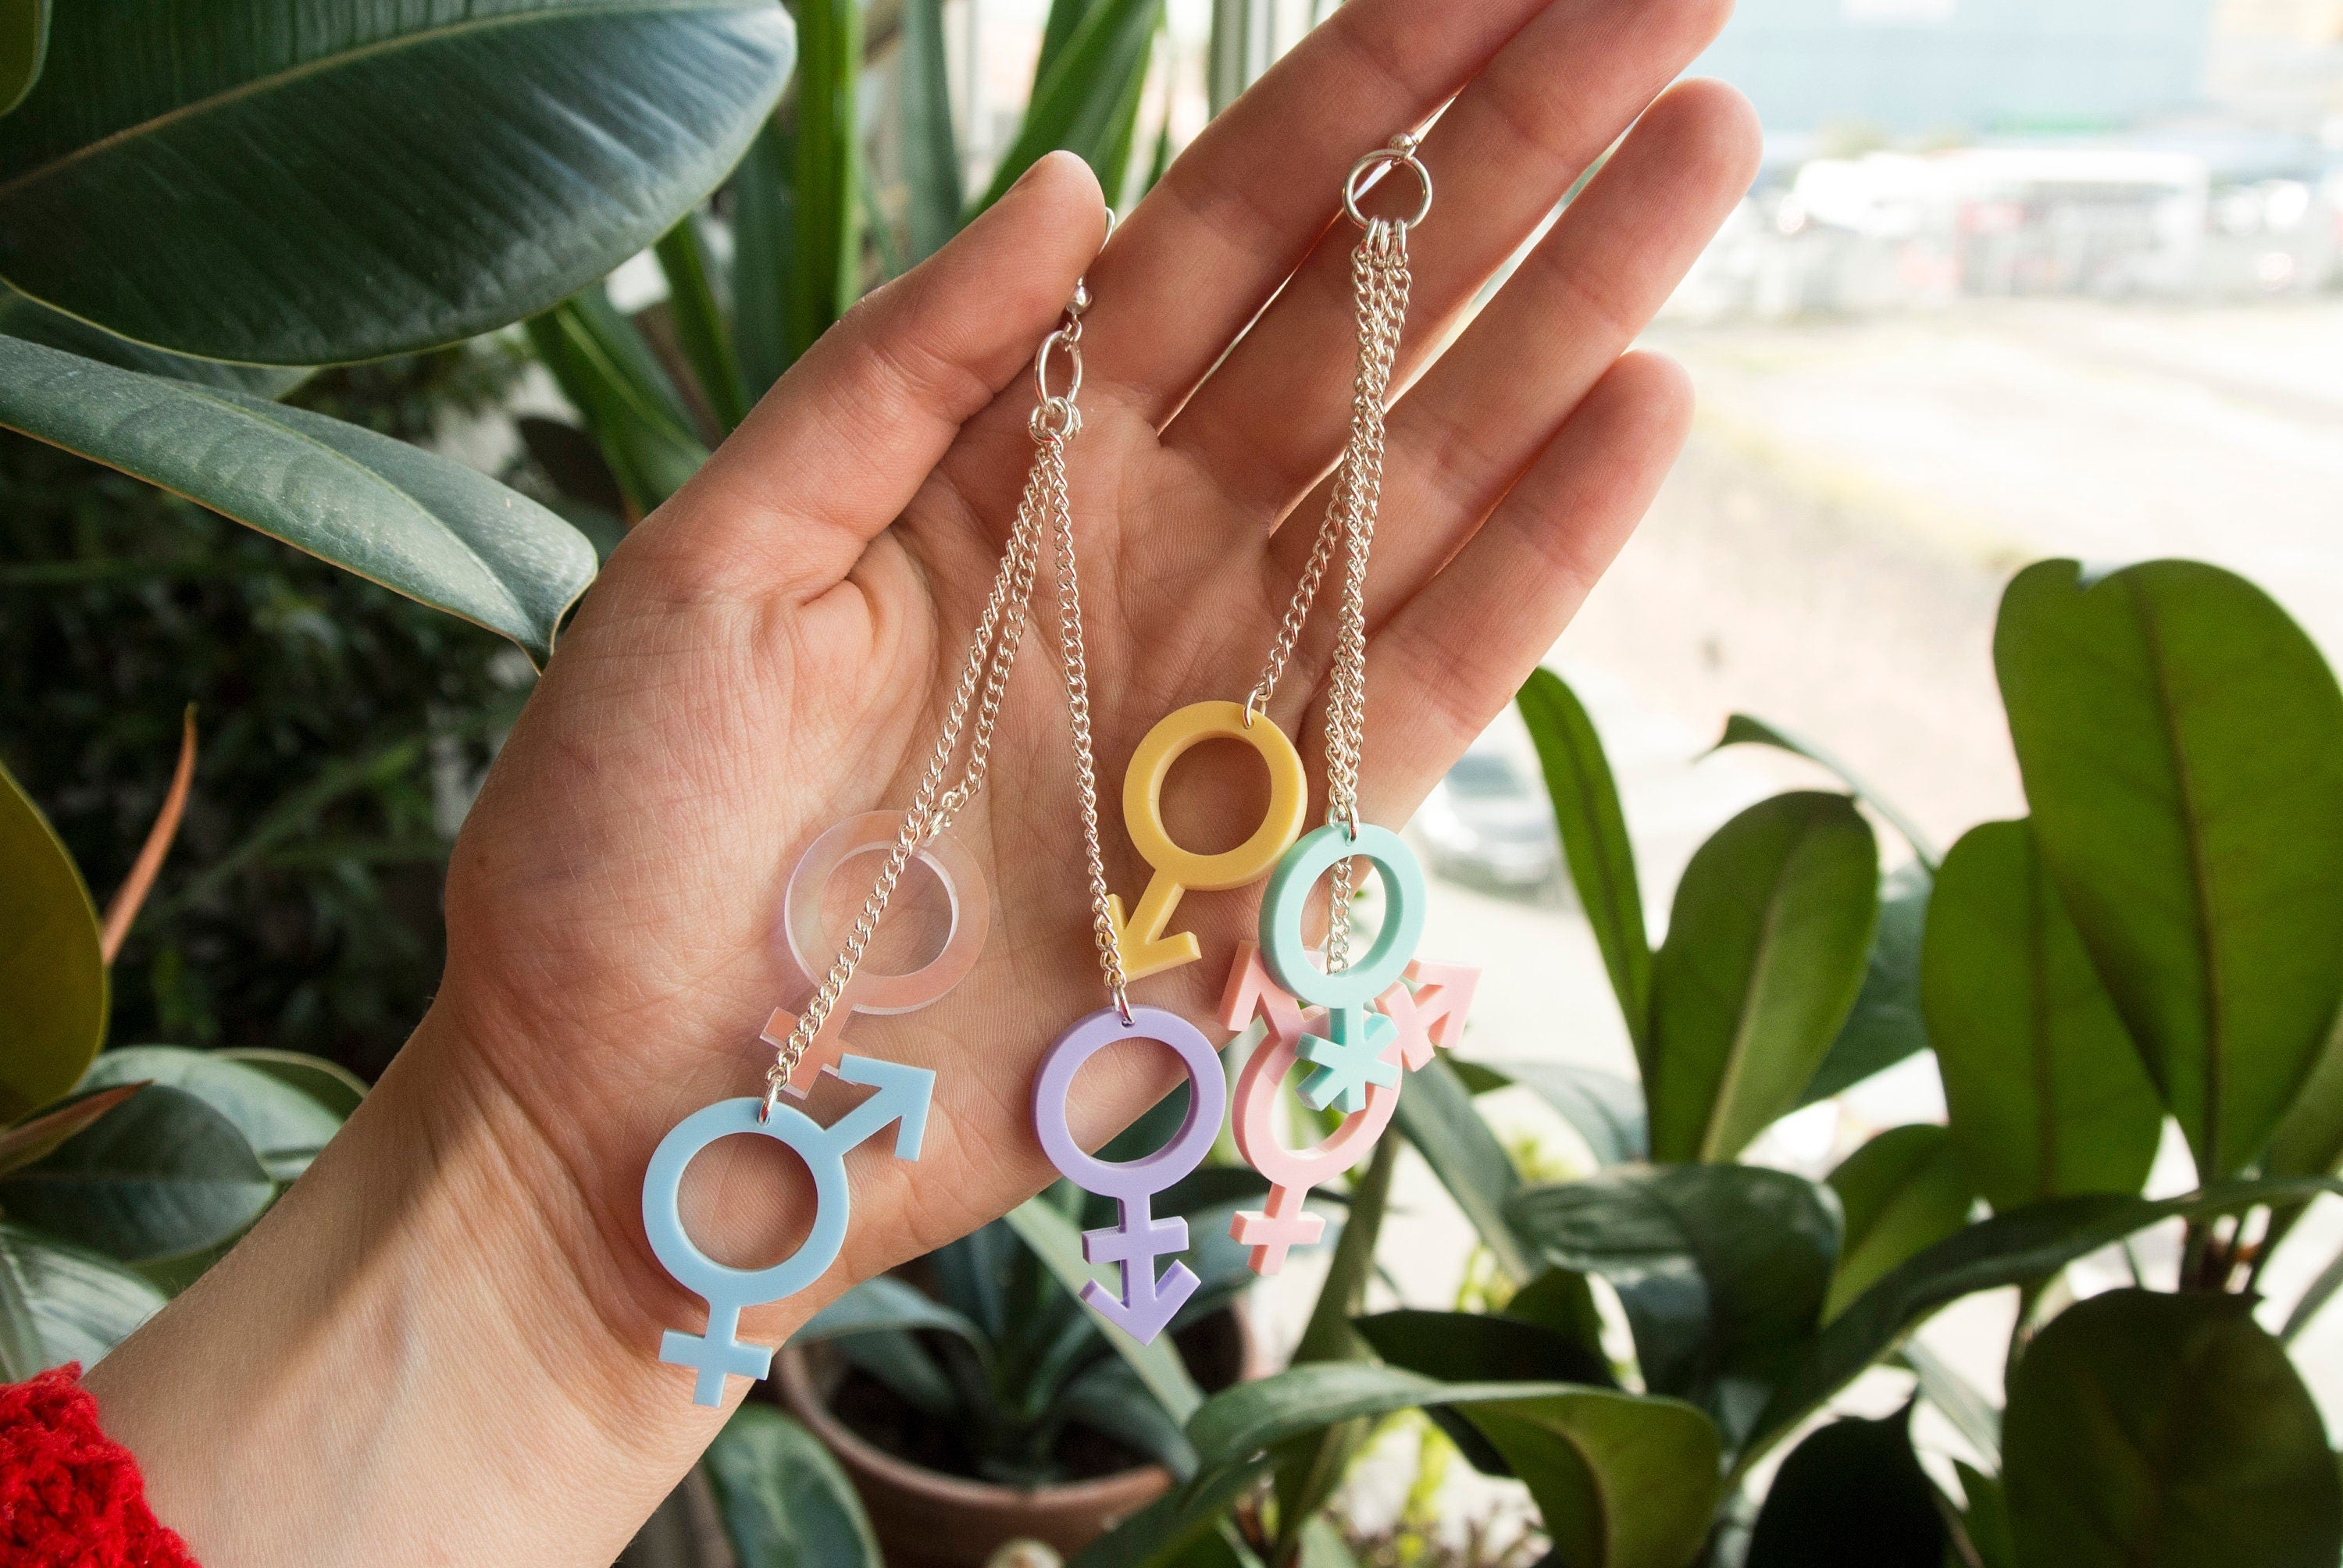 Transgender Female Inside Male Symbol - Two Section Stainless Steel LGBT  Pendant w/ Chain Necklace Included! - Pride Shack